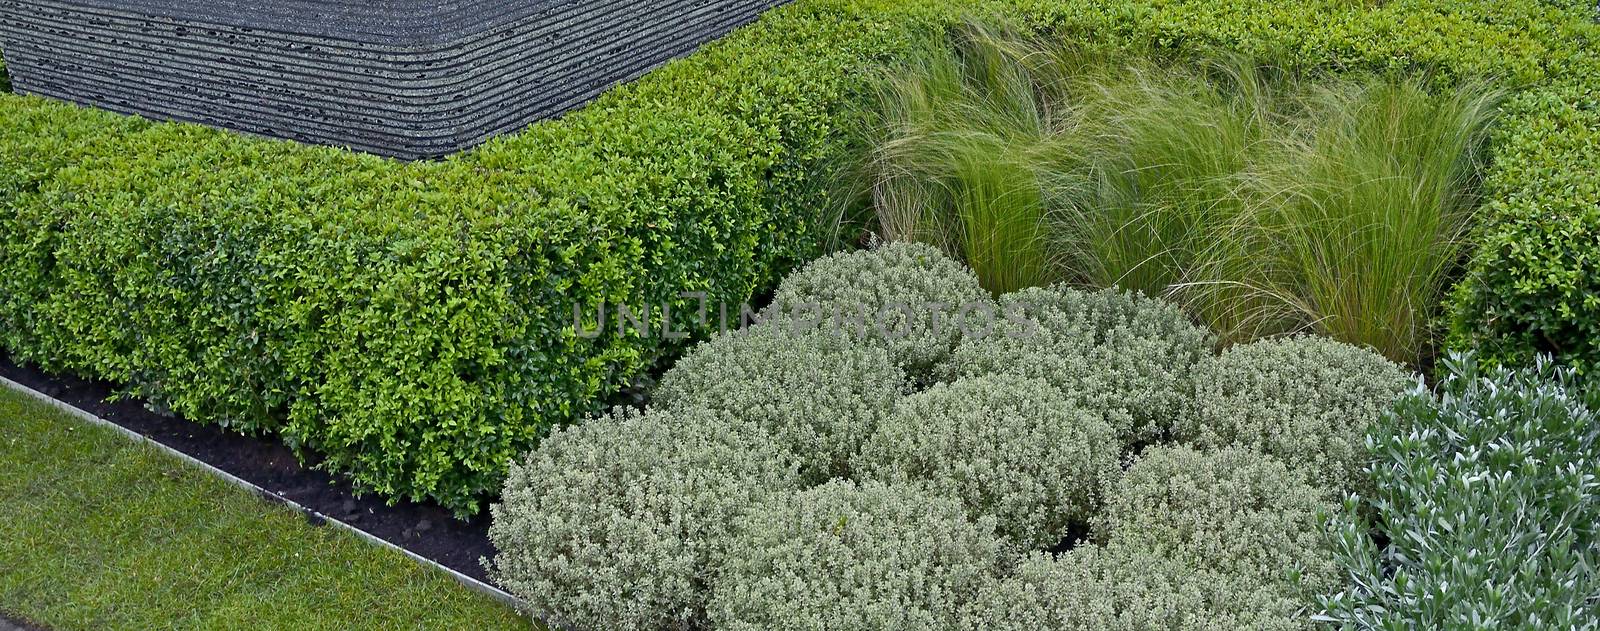 Interesting arrangement  of topiary plants and grasses in  a.garden border